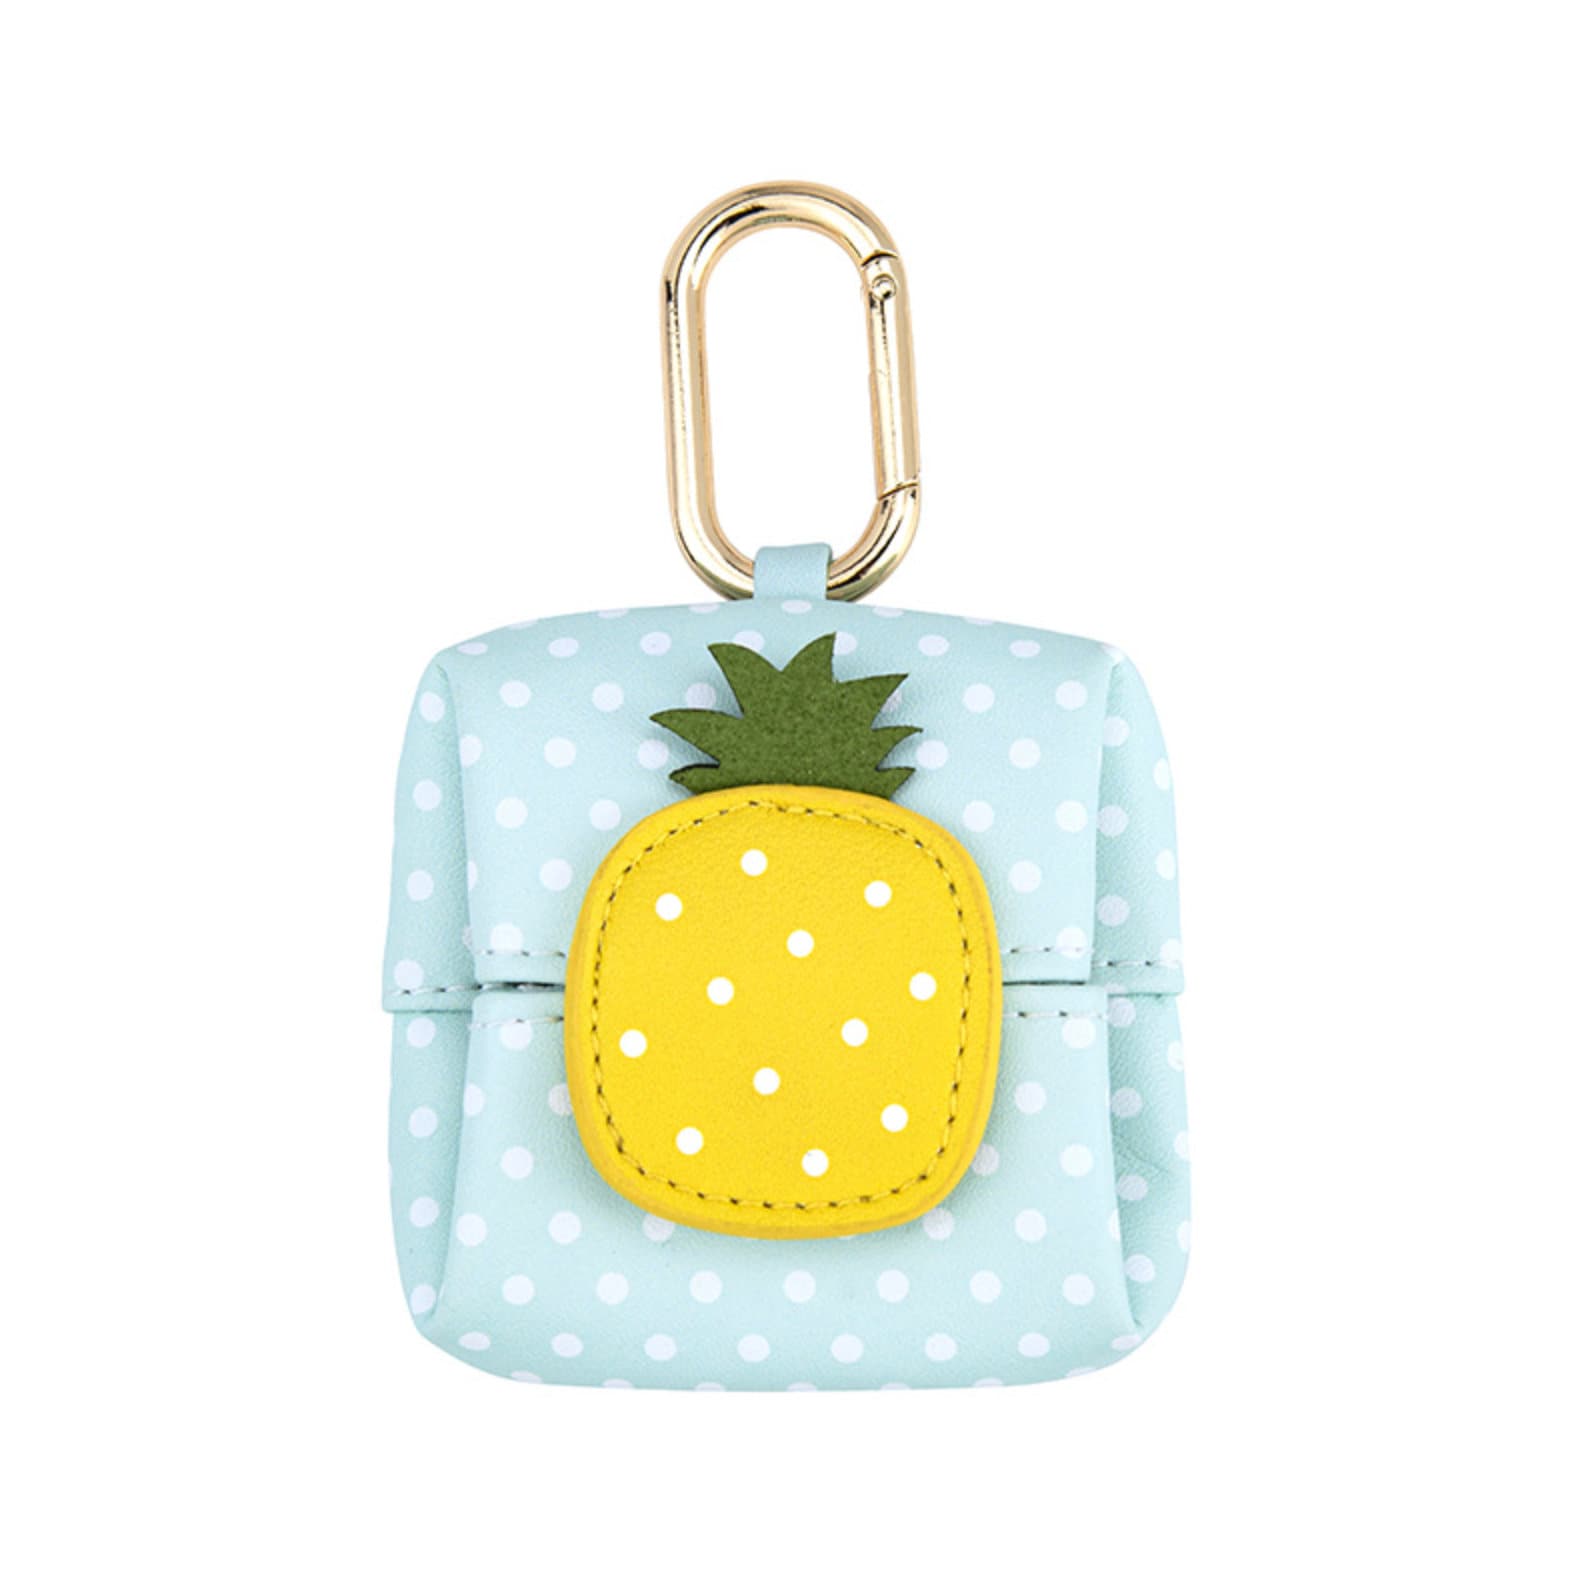 Cute Food Themed AirTag, Small Accessory Bag with Clasp (Egg, Bread, Lemon, Carrot, Strawberry, Pineapple, Avocado)